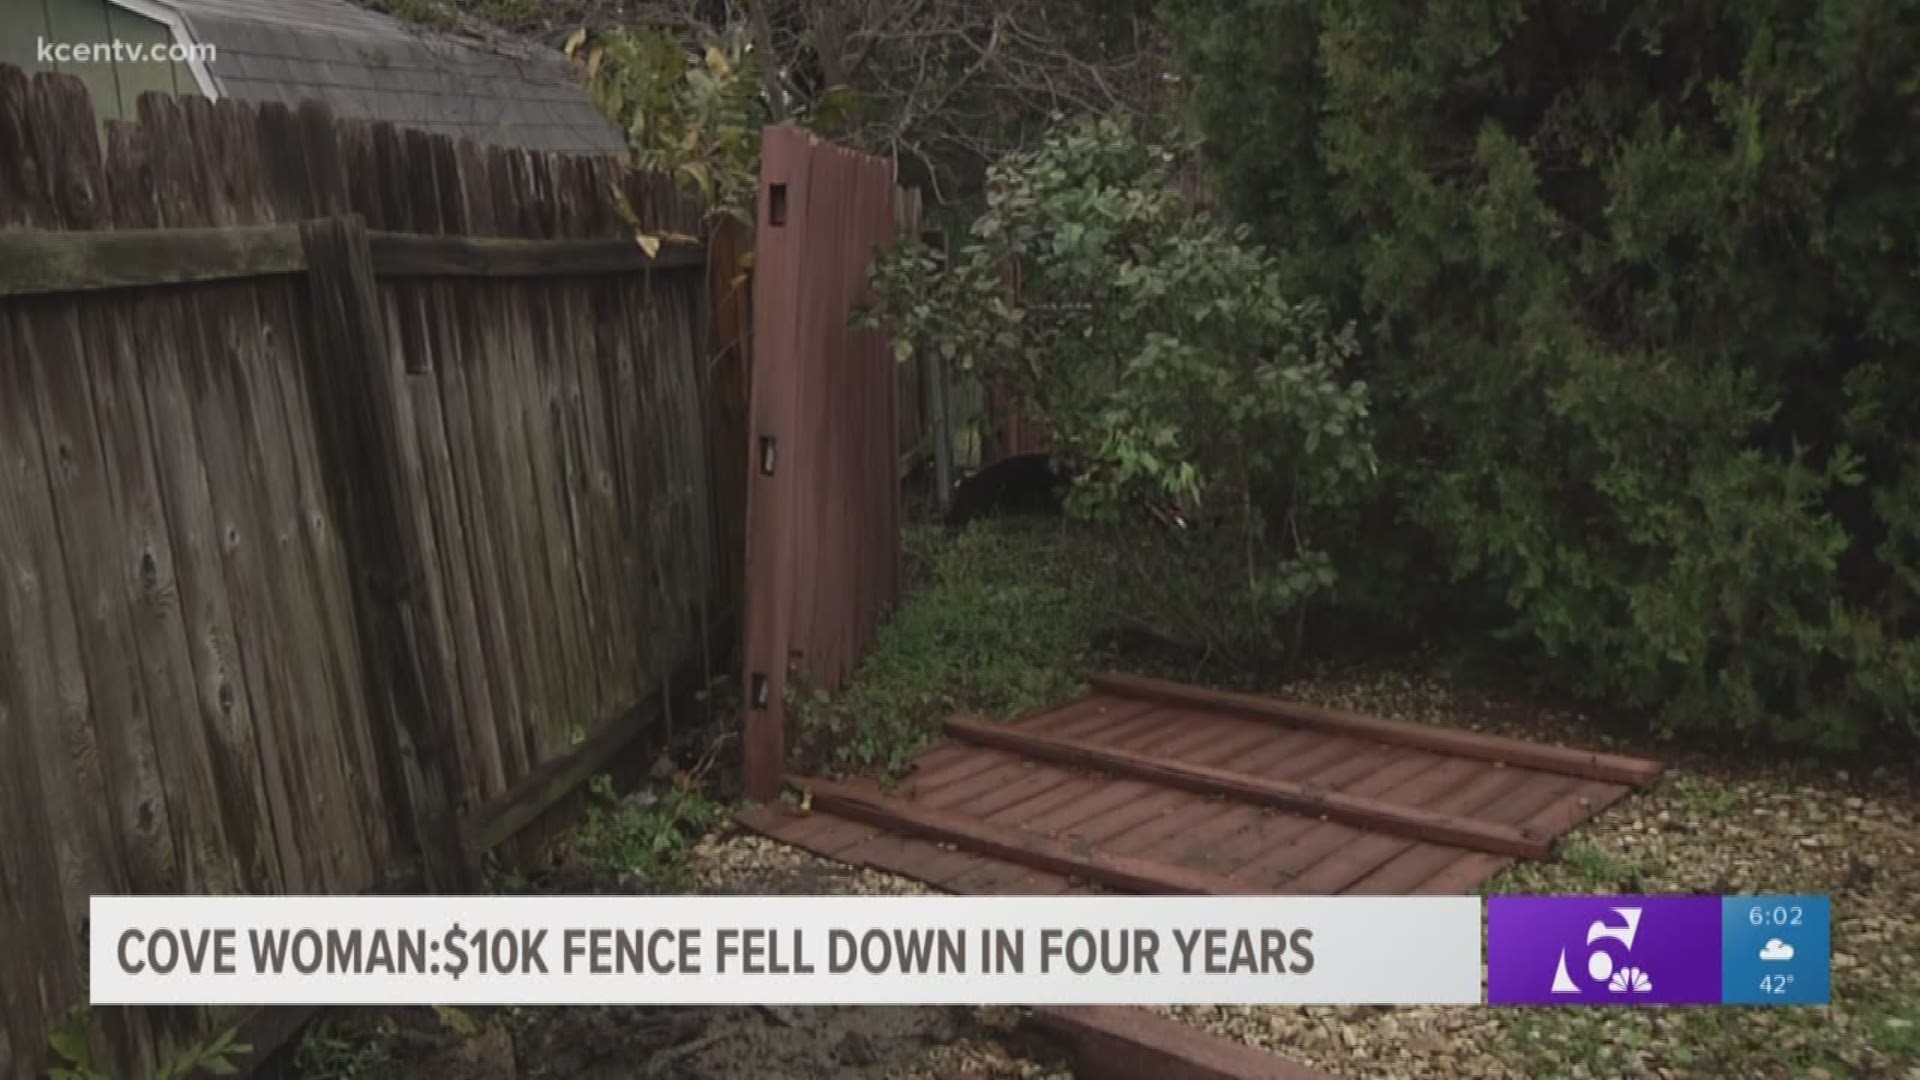 Cove Woman: $10k fence fell down in four years